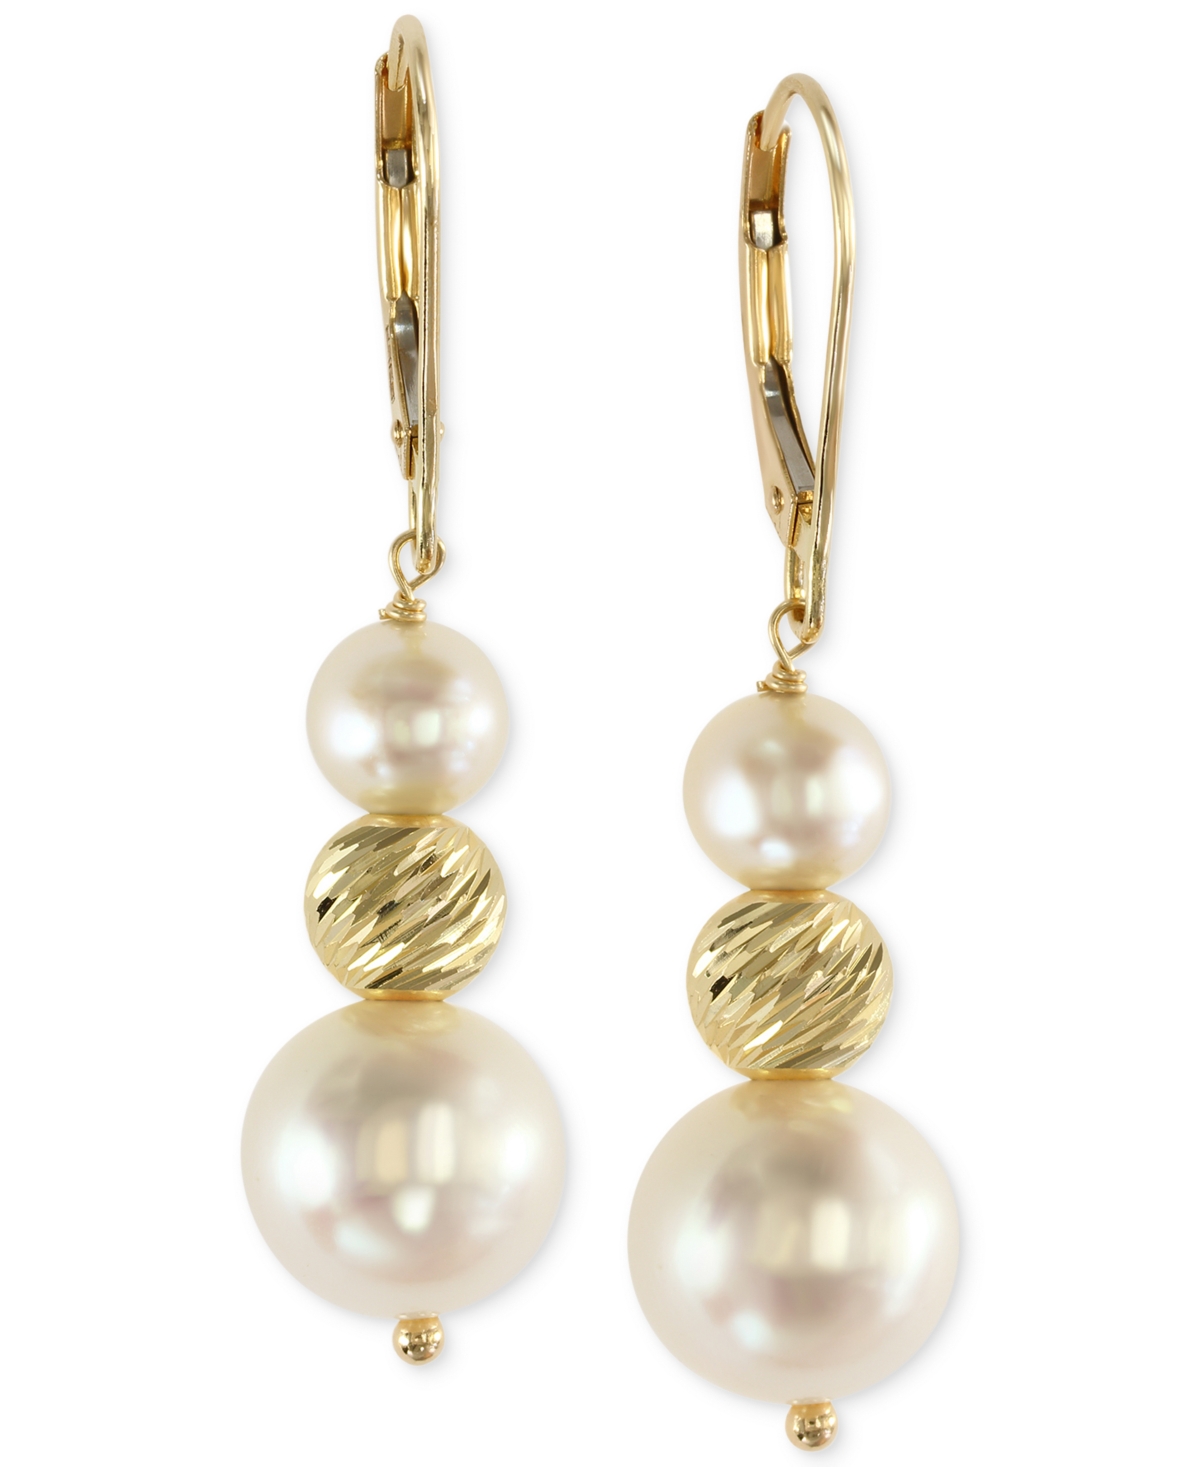 Effy Collection Effy Cultured Freshwater Pearl Drop Earrings in 14k Gold (5-1/2mm and 11mm)